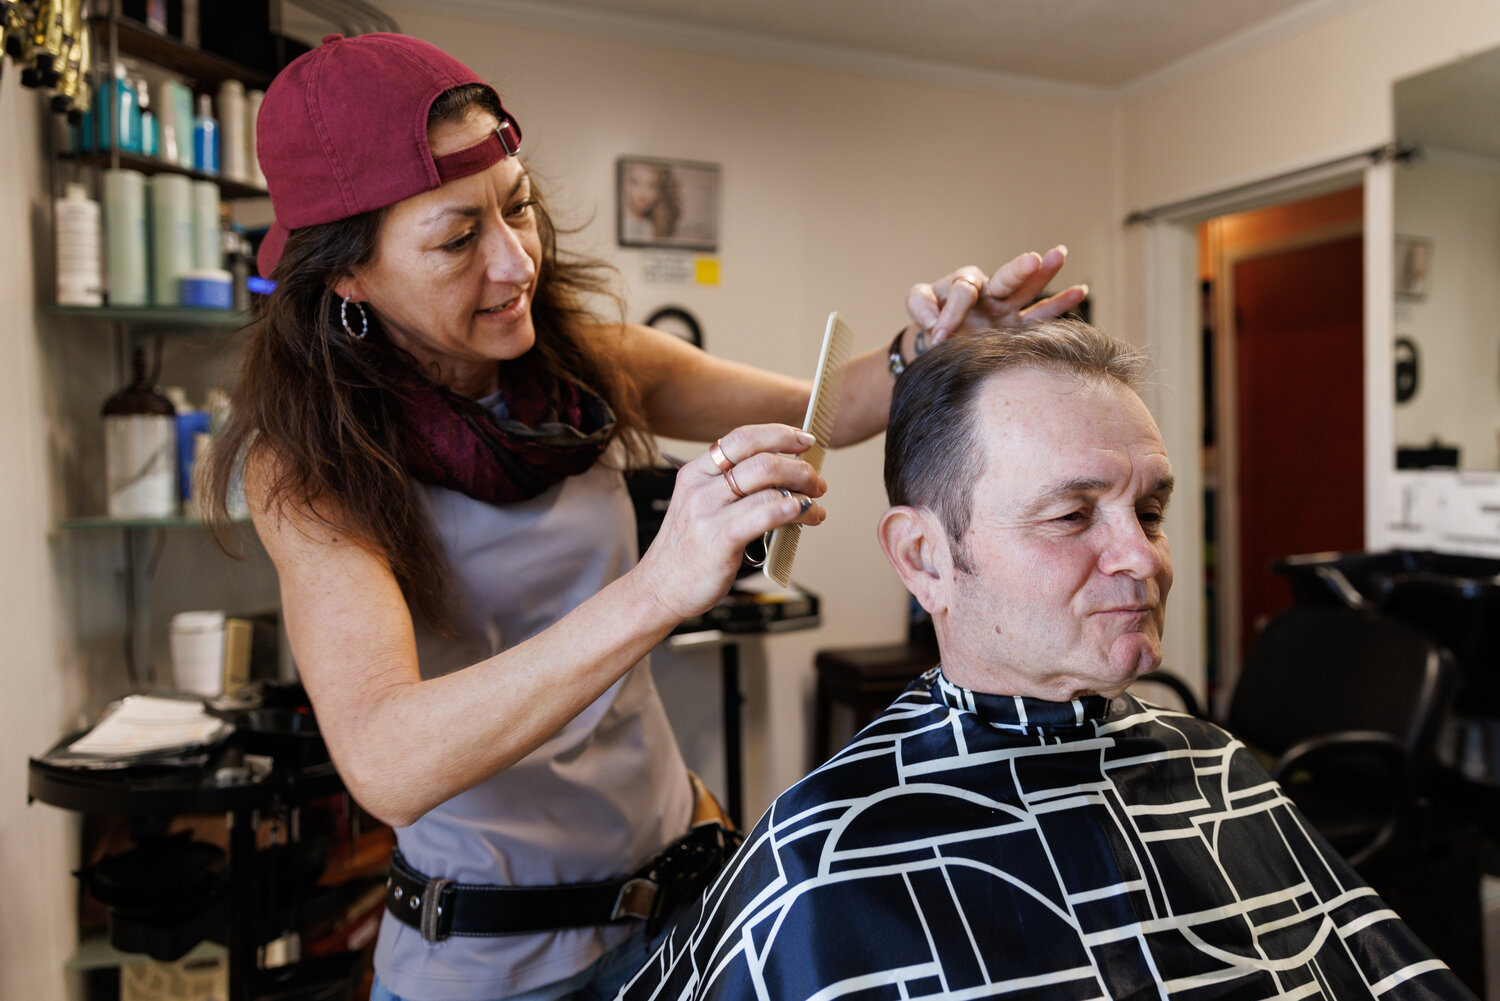 Stylist Sabrina Heeks trims Mike Costello's hair at Scissors on Marlborough salon. Mike enjoys the experience and considers it a necessary part of his self-care routine.